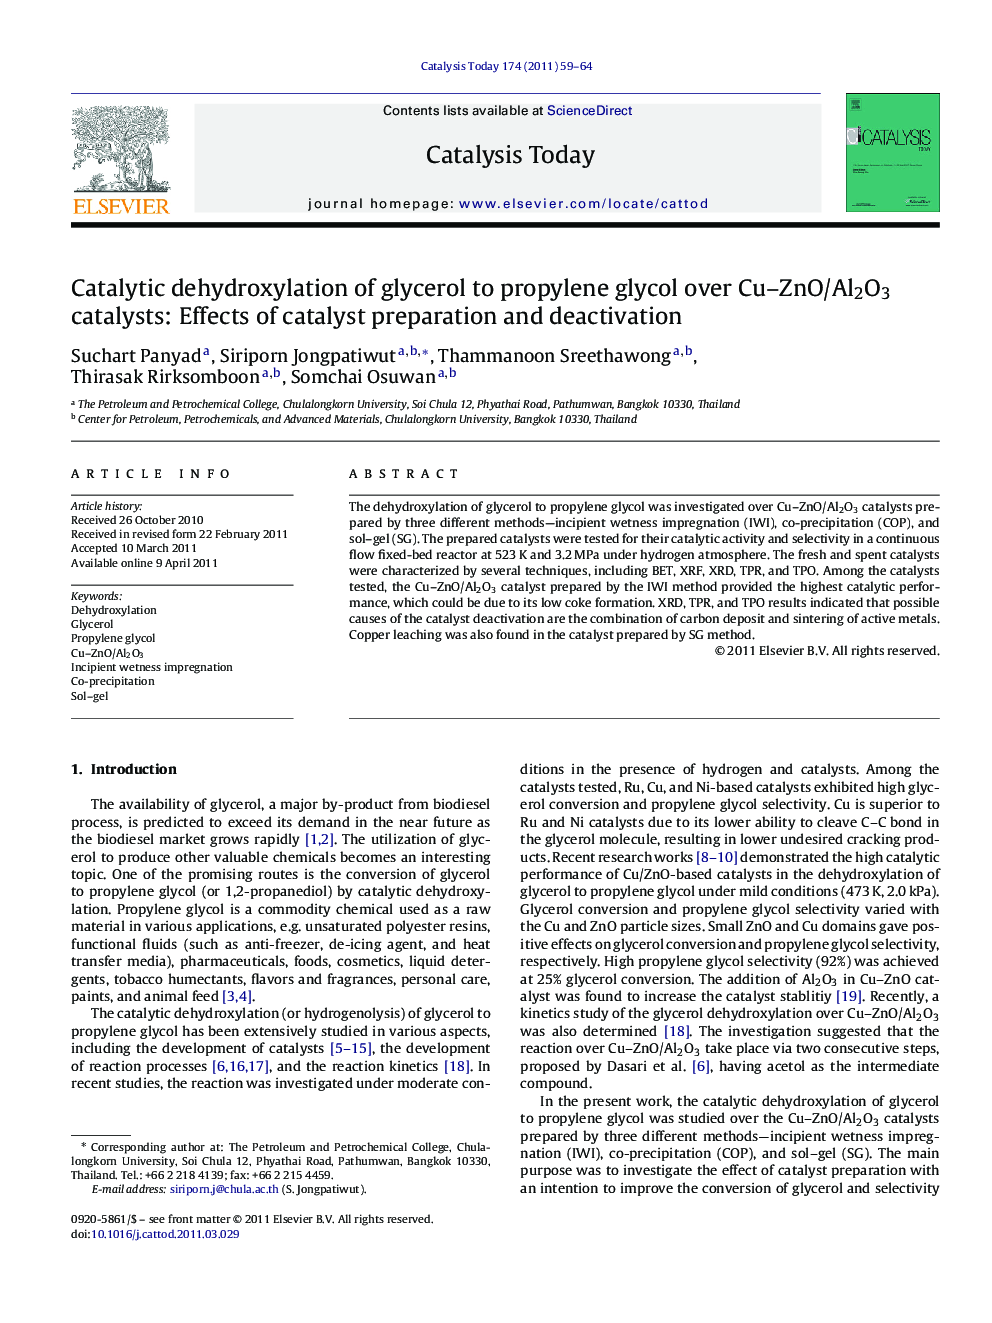 Catalytic dehydroxylation of glycerol to propylene glycol over Cu–ZnO/Al2O3 catalysts: Effects of catalyst preparation and deactivation